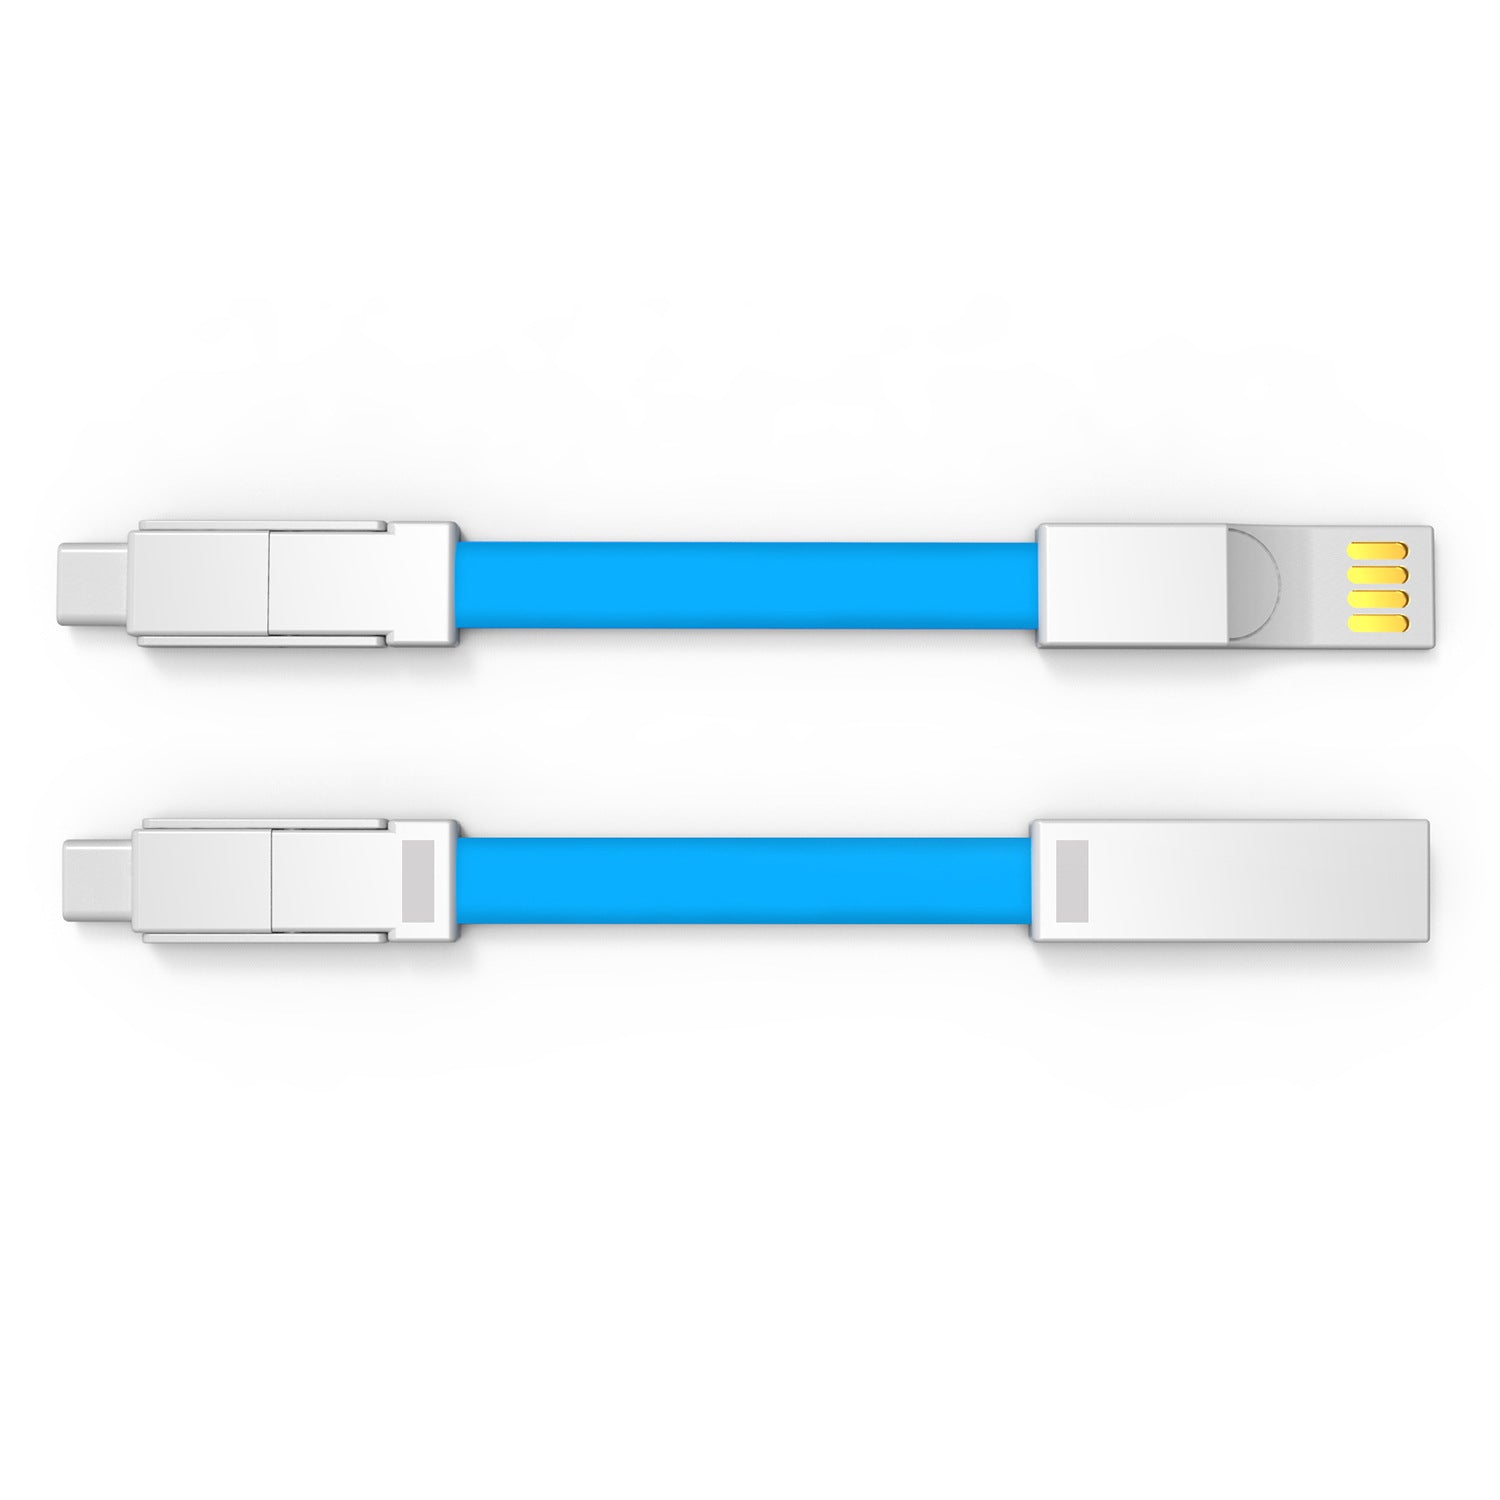 New Micro USB Type-C 3-in-1 Magnet Data Cable